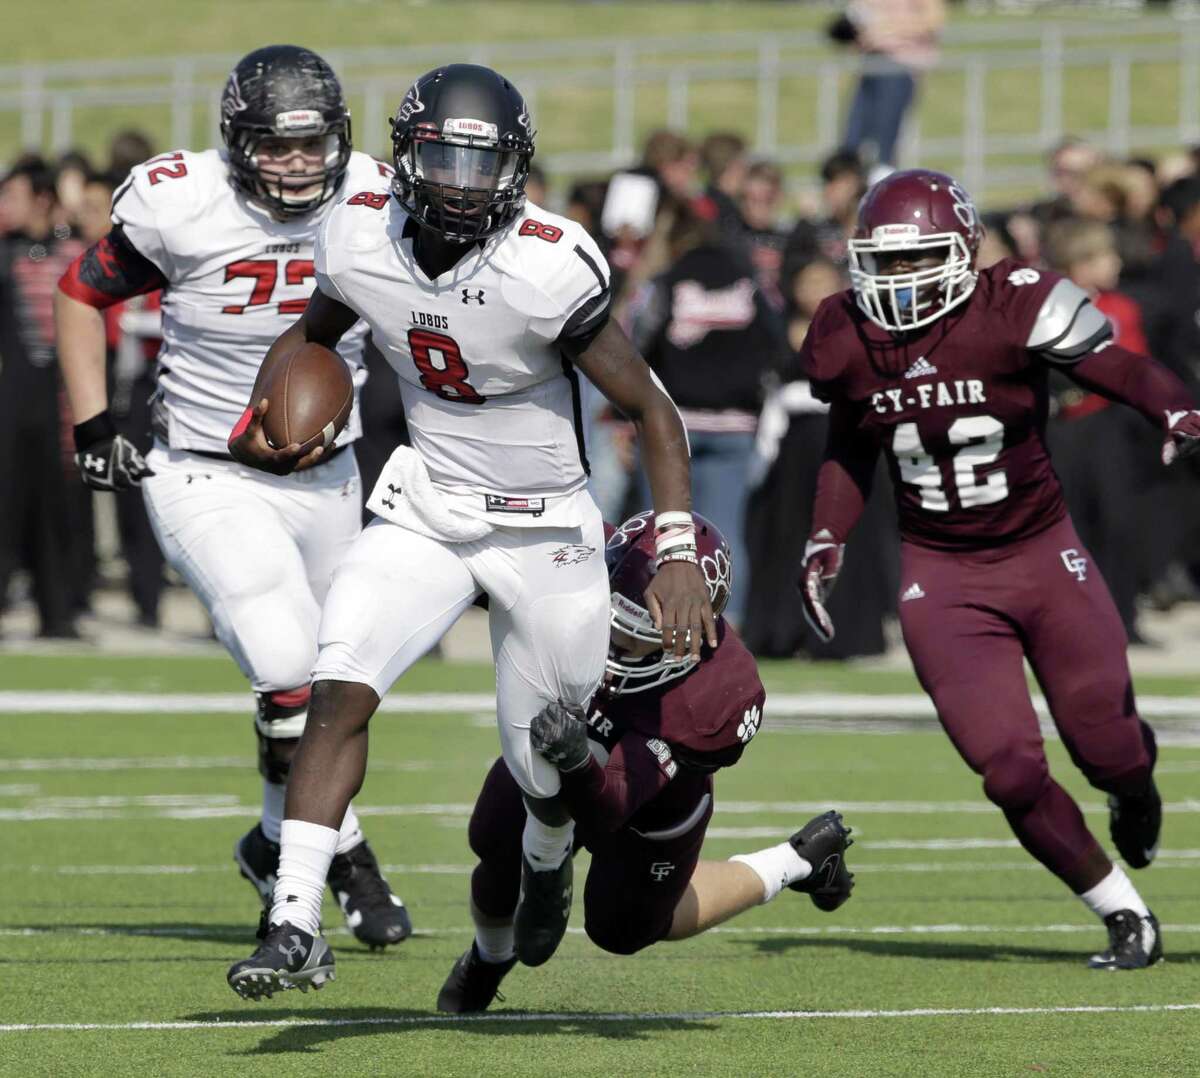 Langham Creek quarterback Chris Herron (8) is caught by Cy-Fair's Patrick Atkinson (30) during the first half of their game Saturday, Nov. 11, 2017, in Houston.